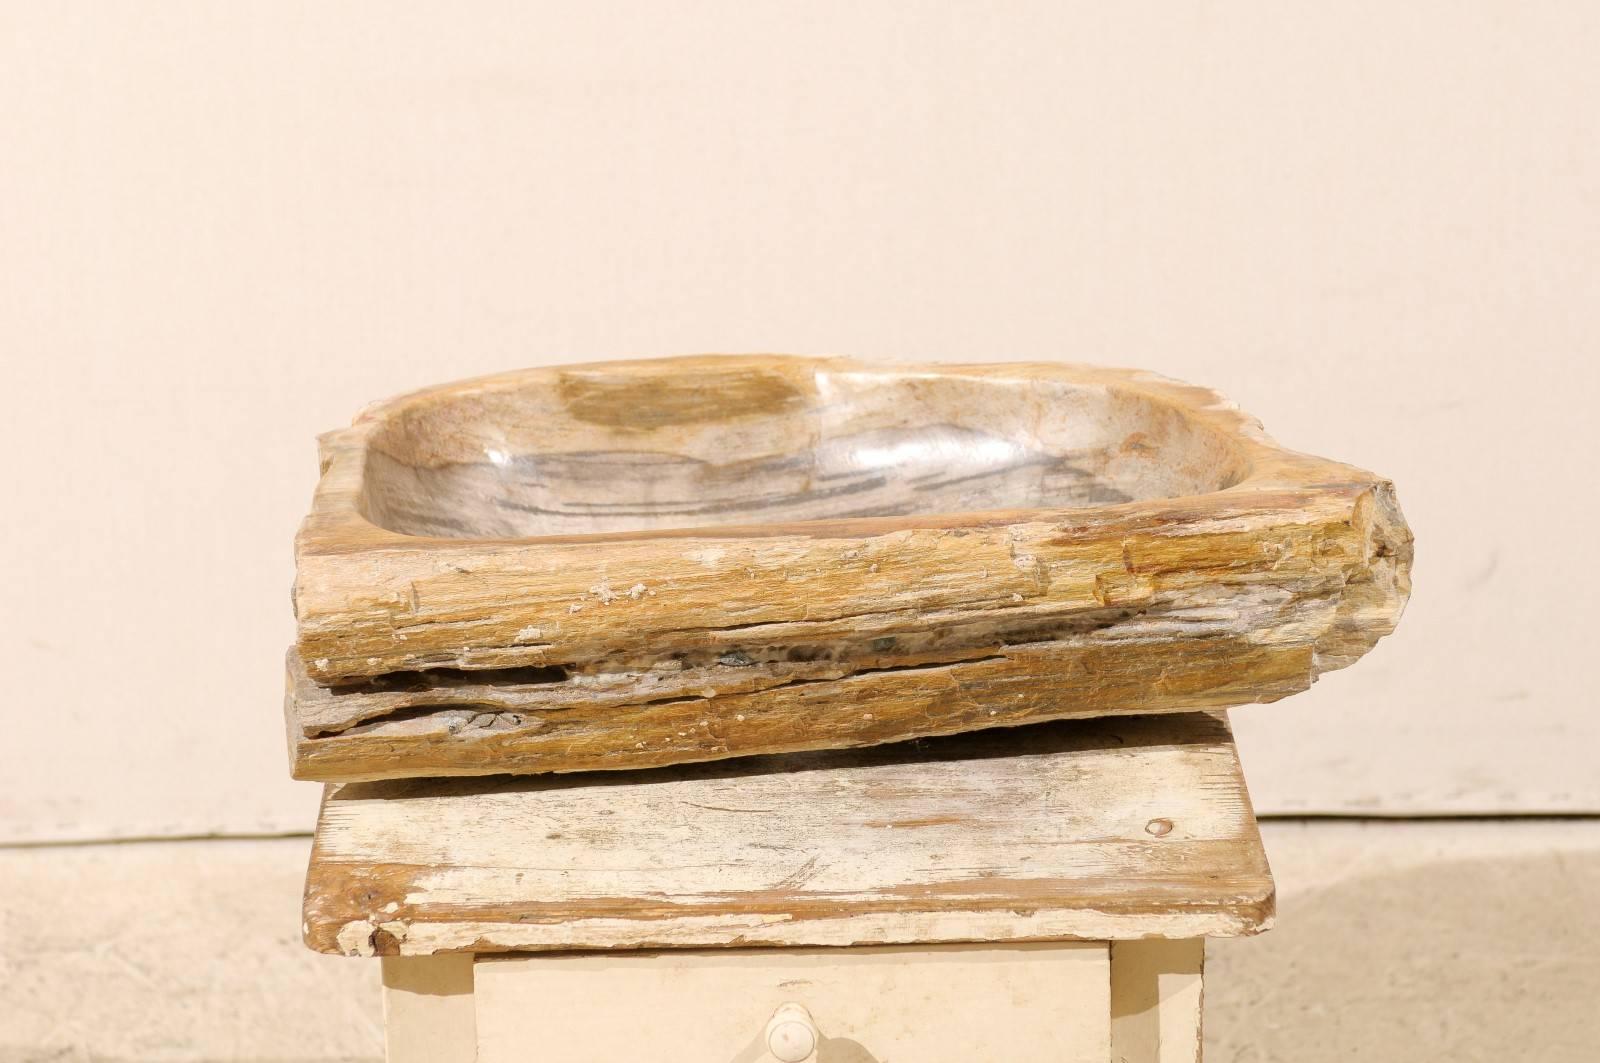 Indonesian Oblong Petrified Wood Sink in Neutral Light Cream Color with Beige / Grey Colors